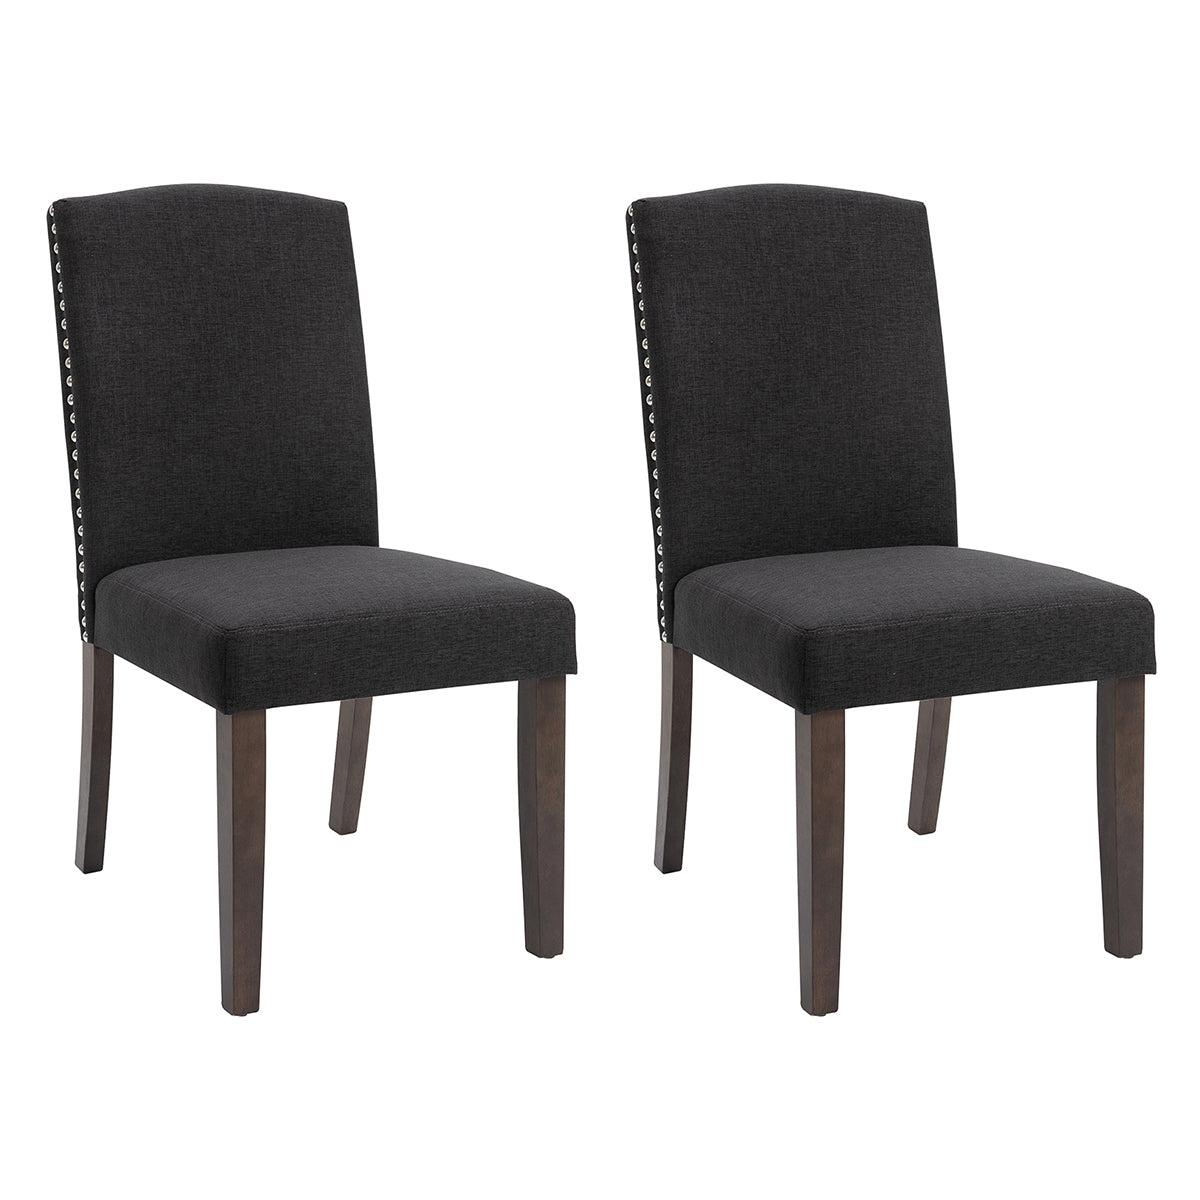 Set of 2 Lethbridge Fabric Dining Chair - Charcoal - Notbrand